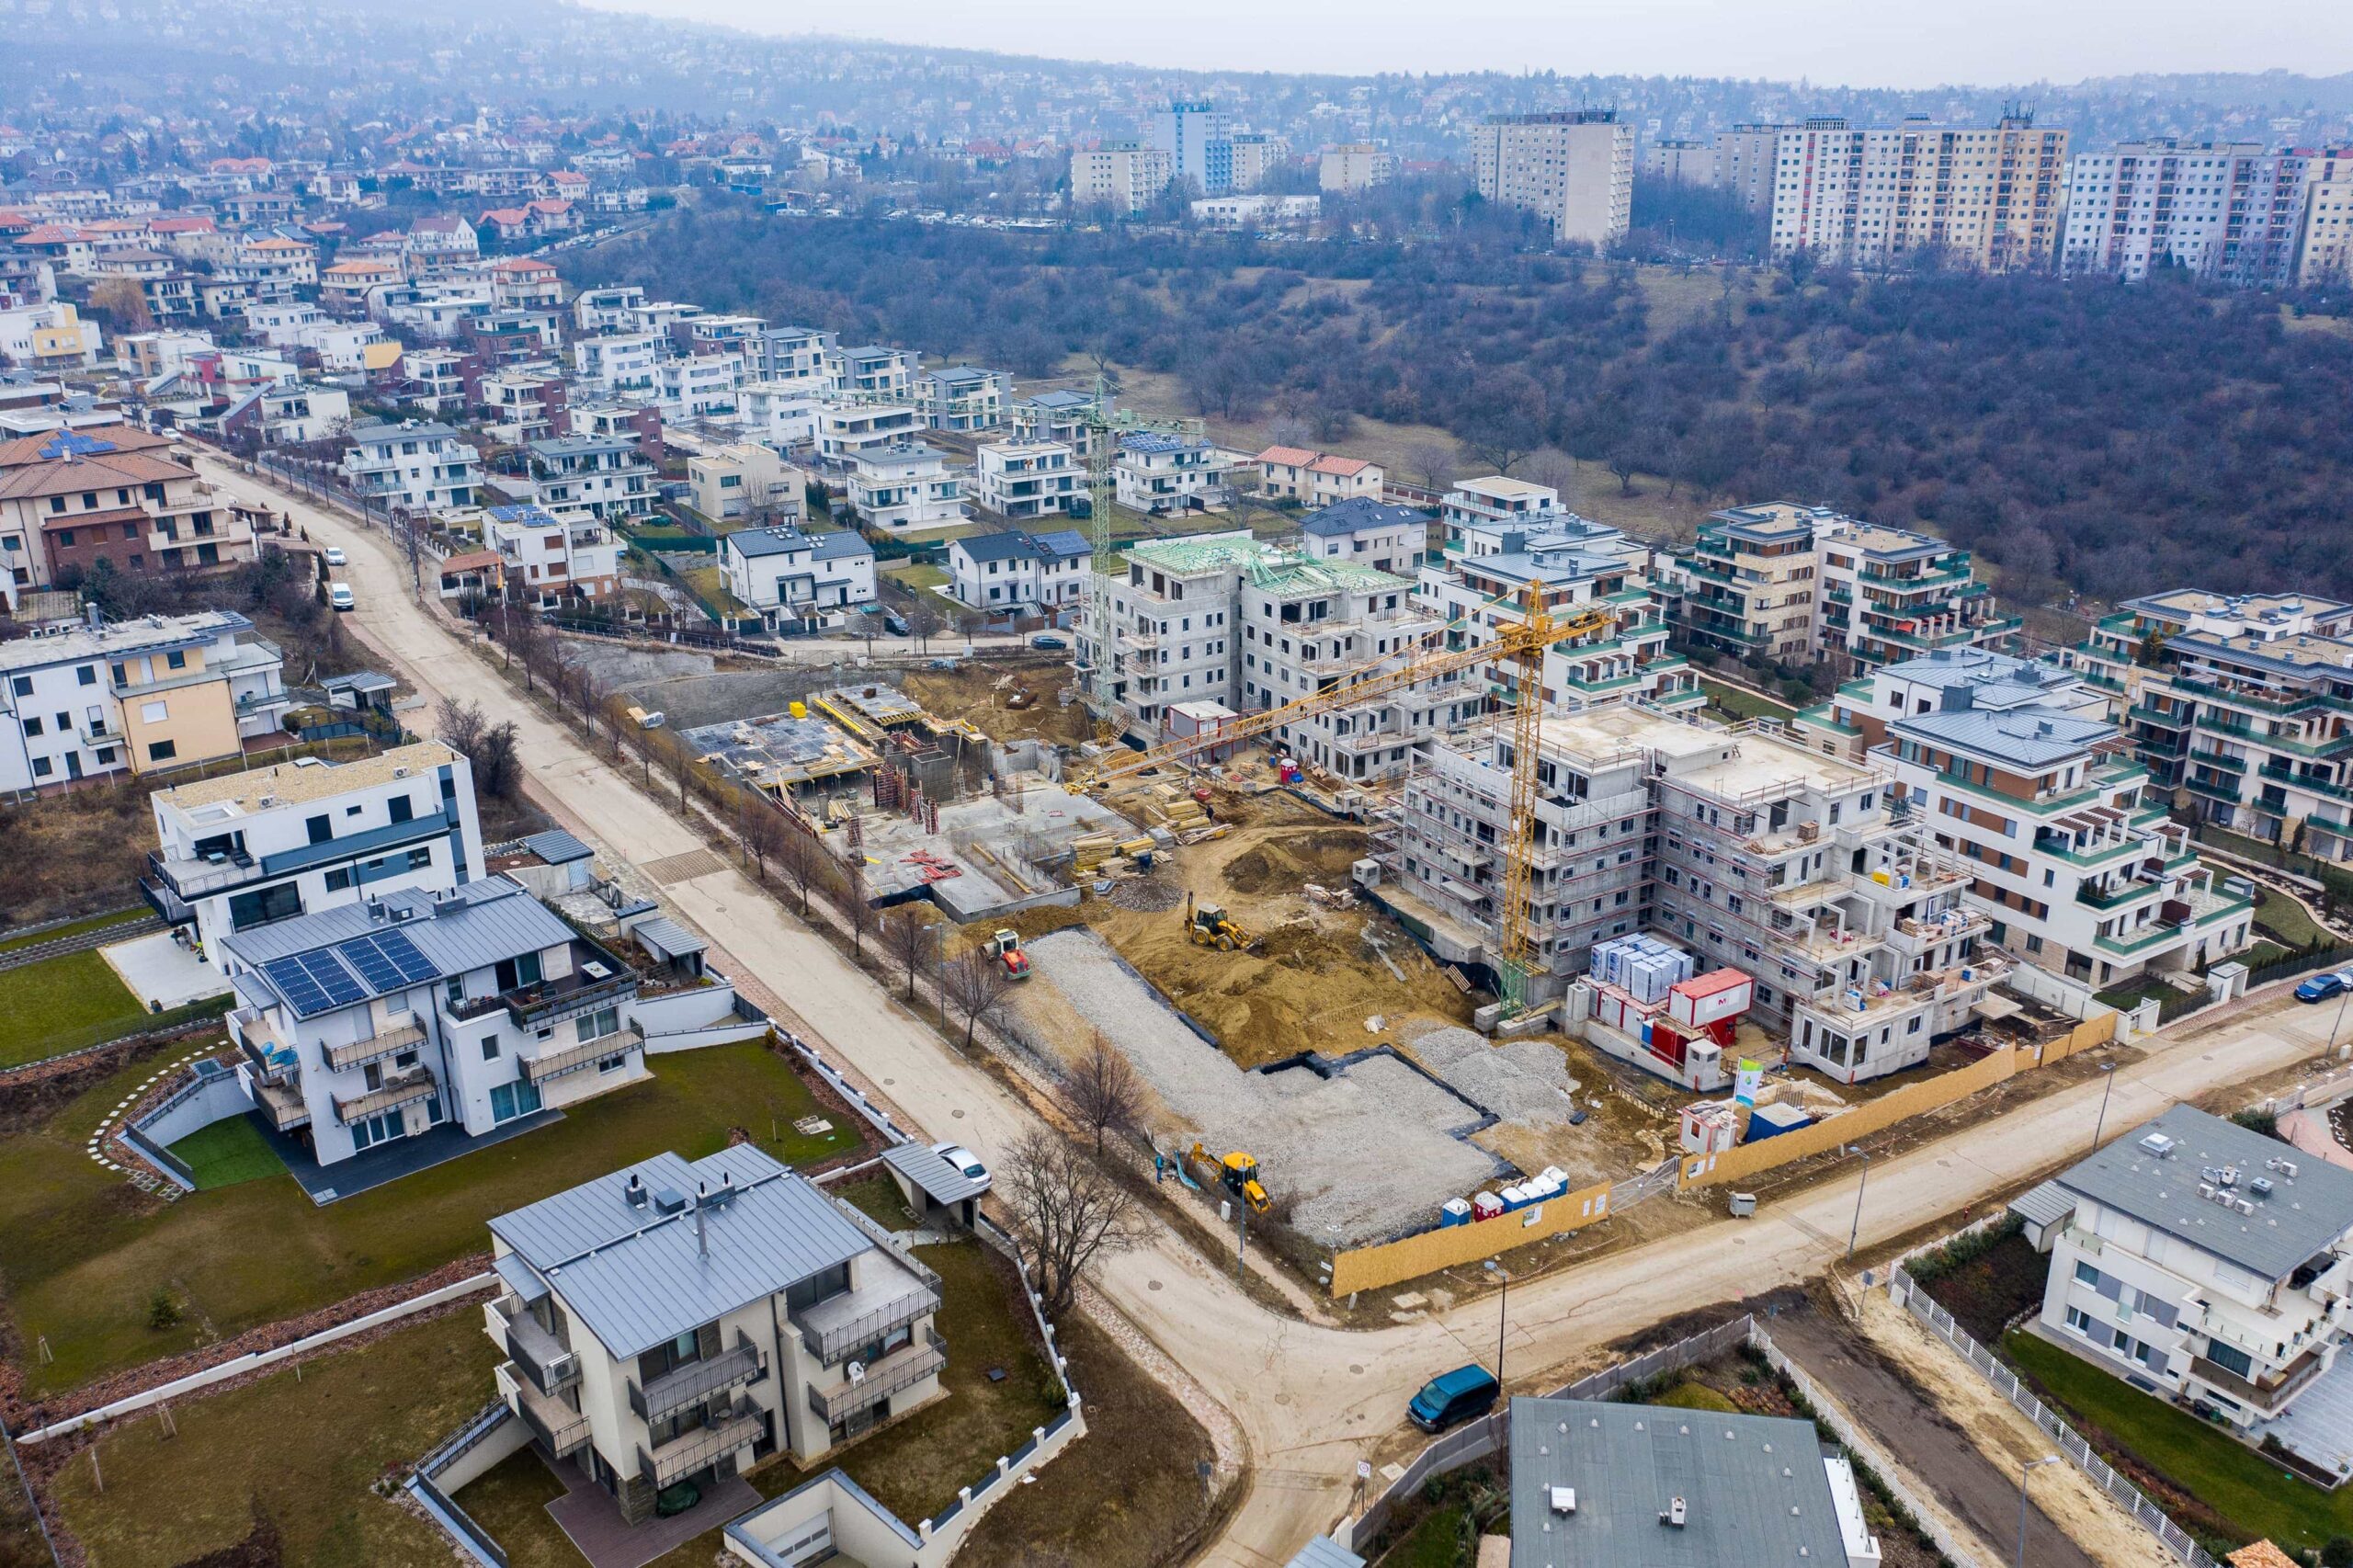 Terrace Residence 4th phase - February 2019